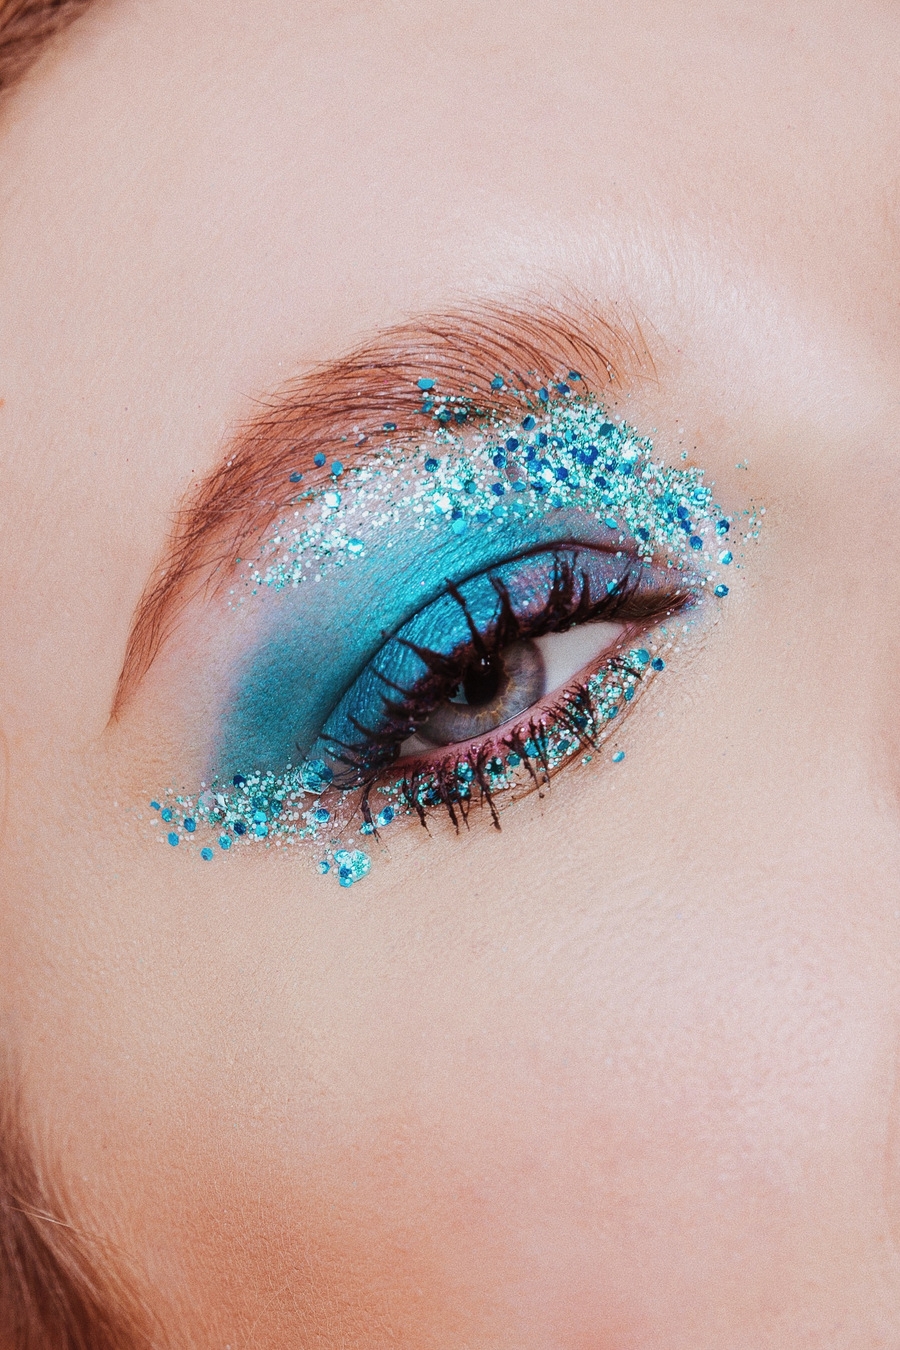 A person wearing blue eye shadow with glittery particles